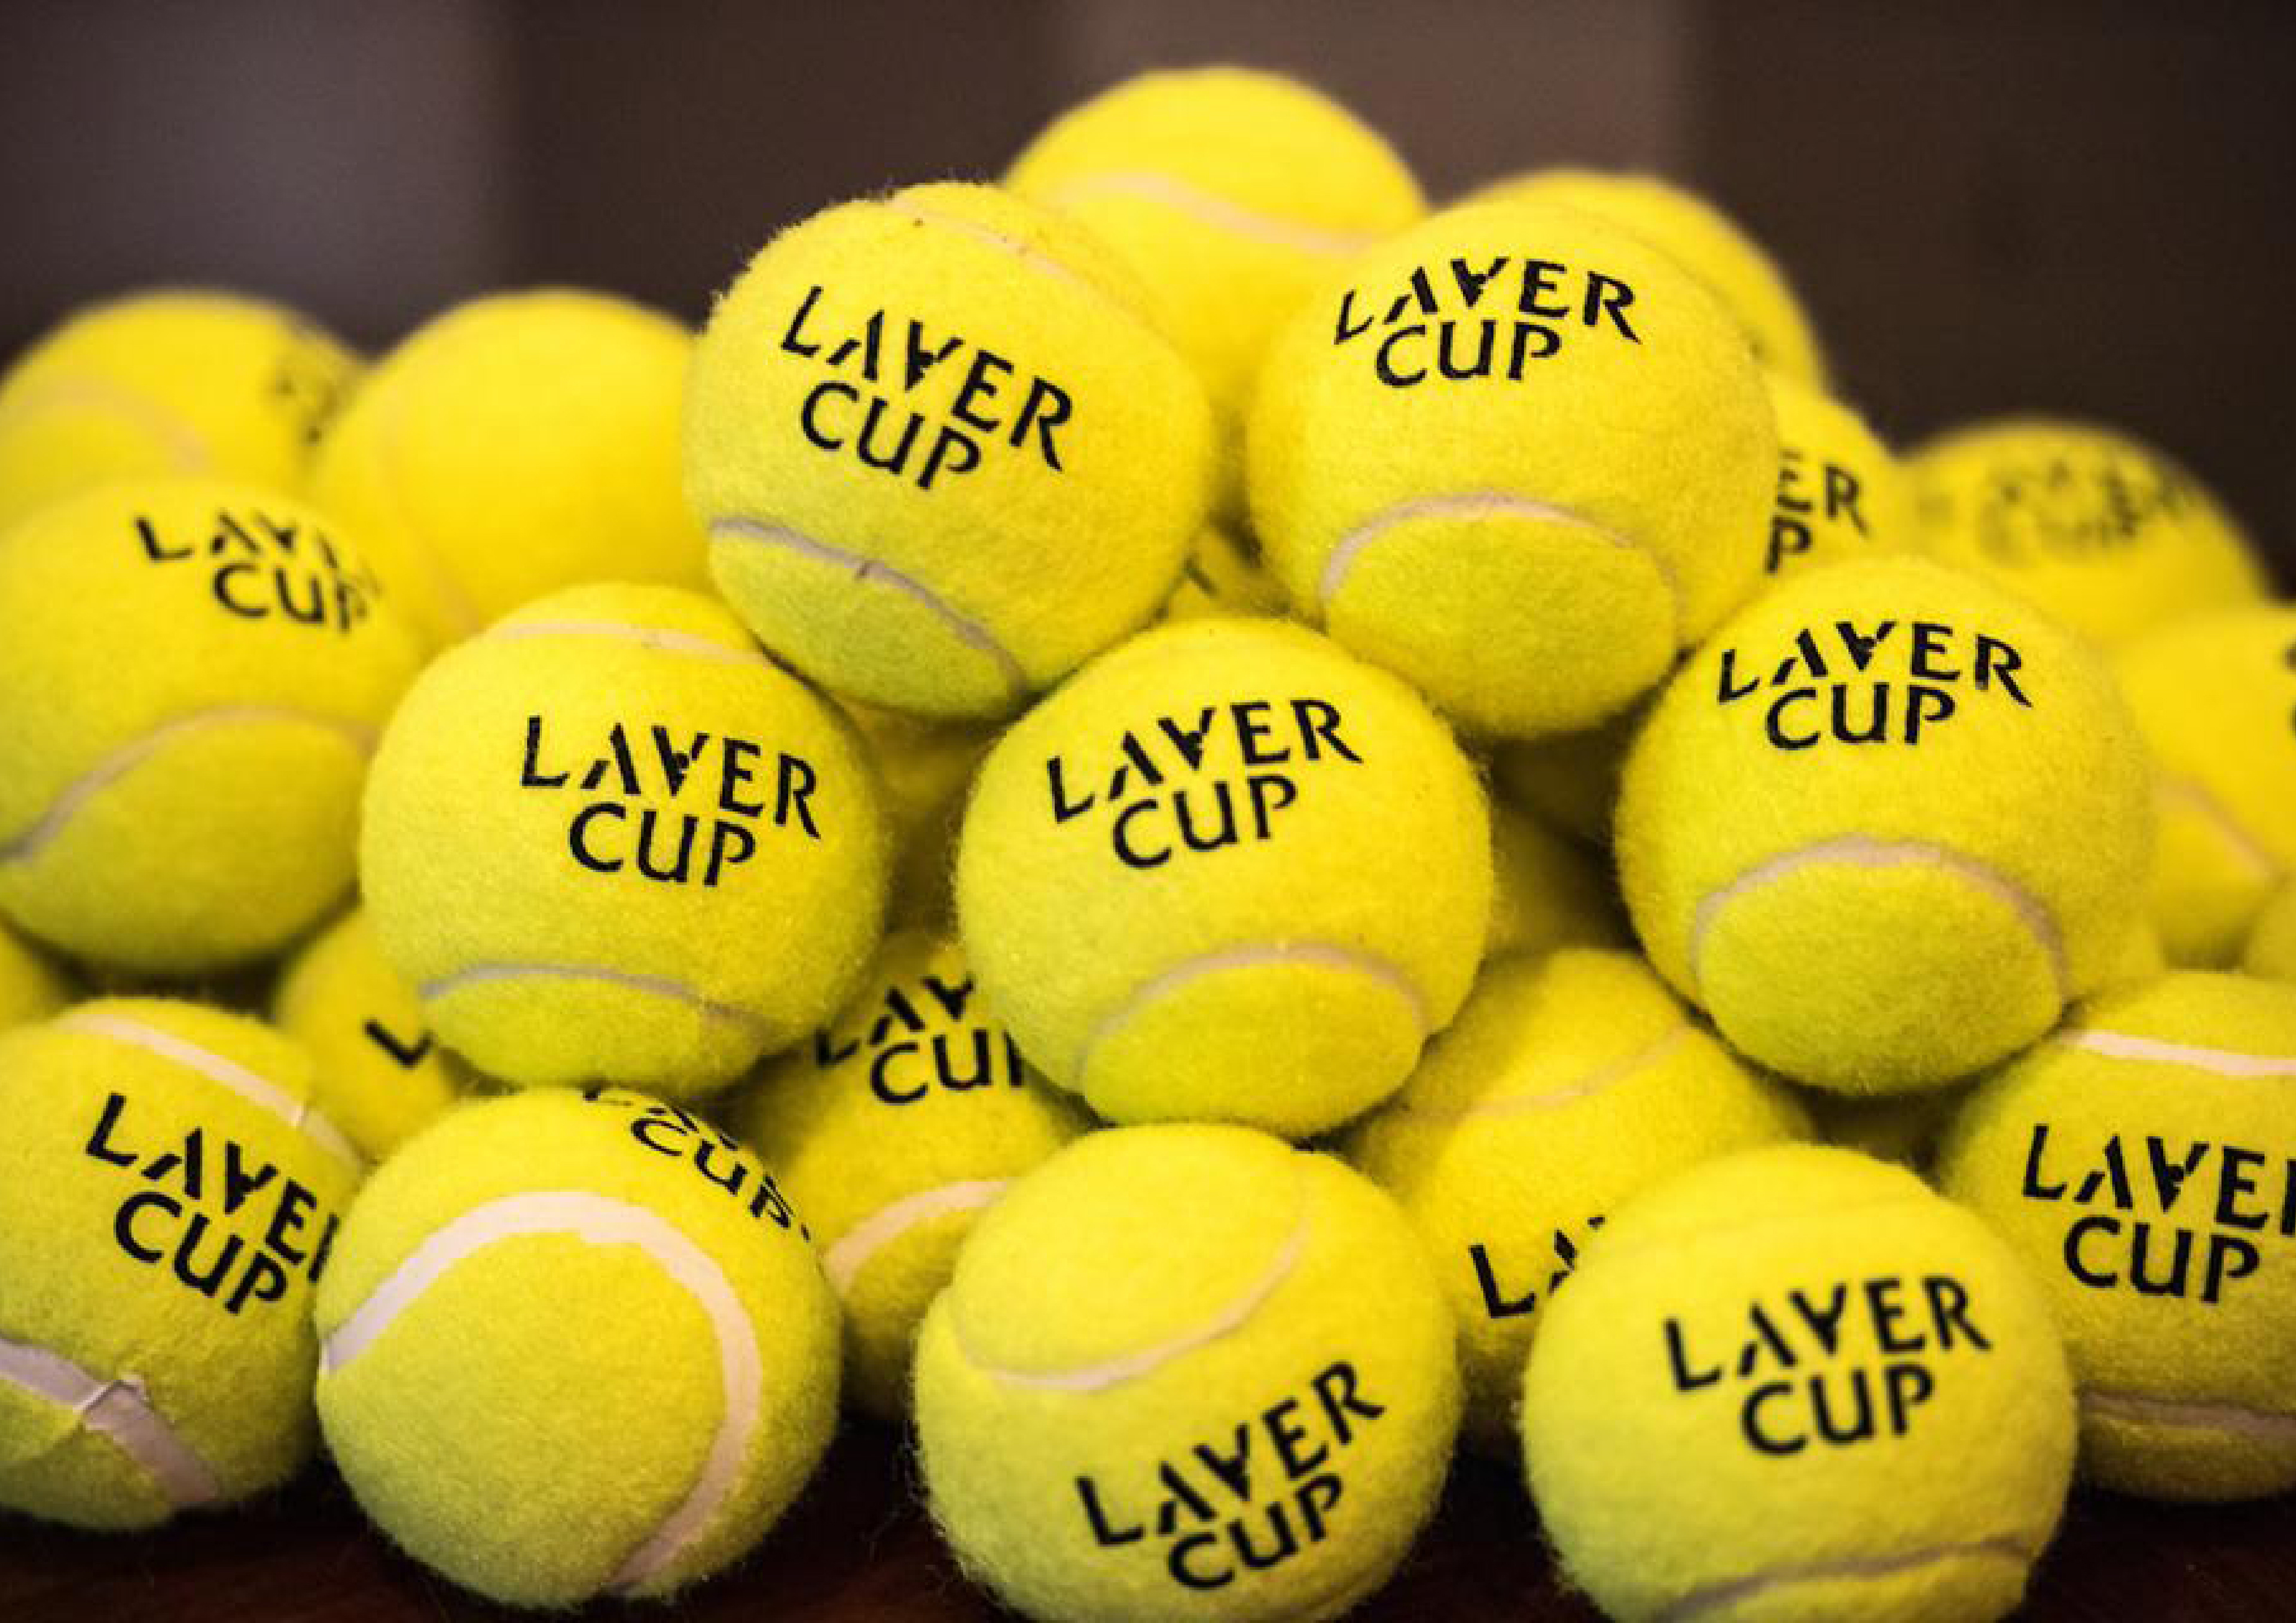 Laver Cup Ticket Prices